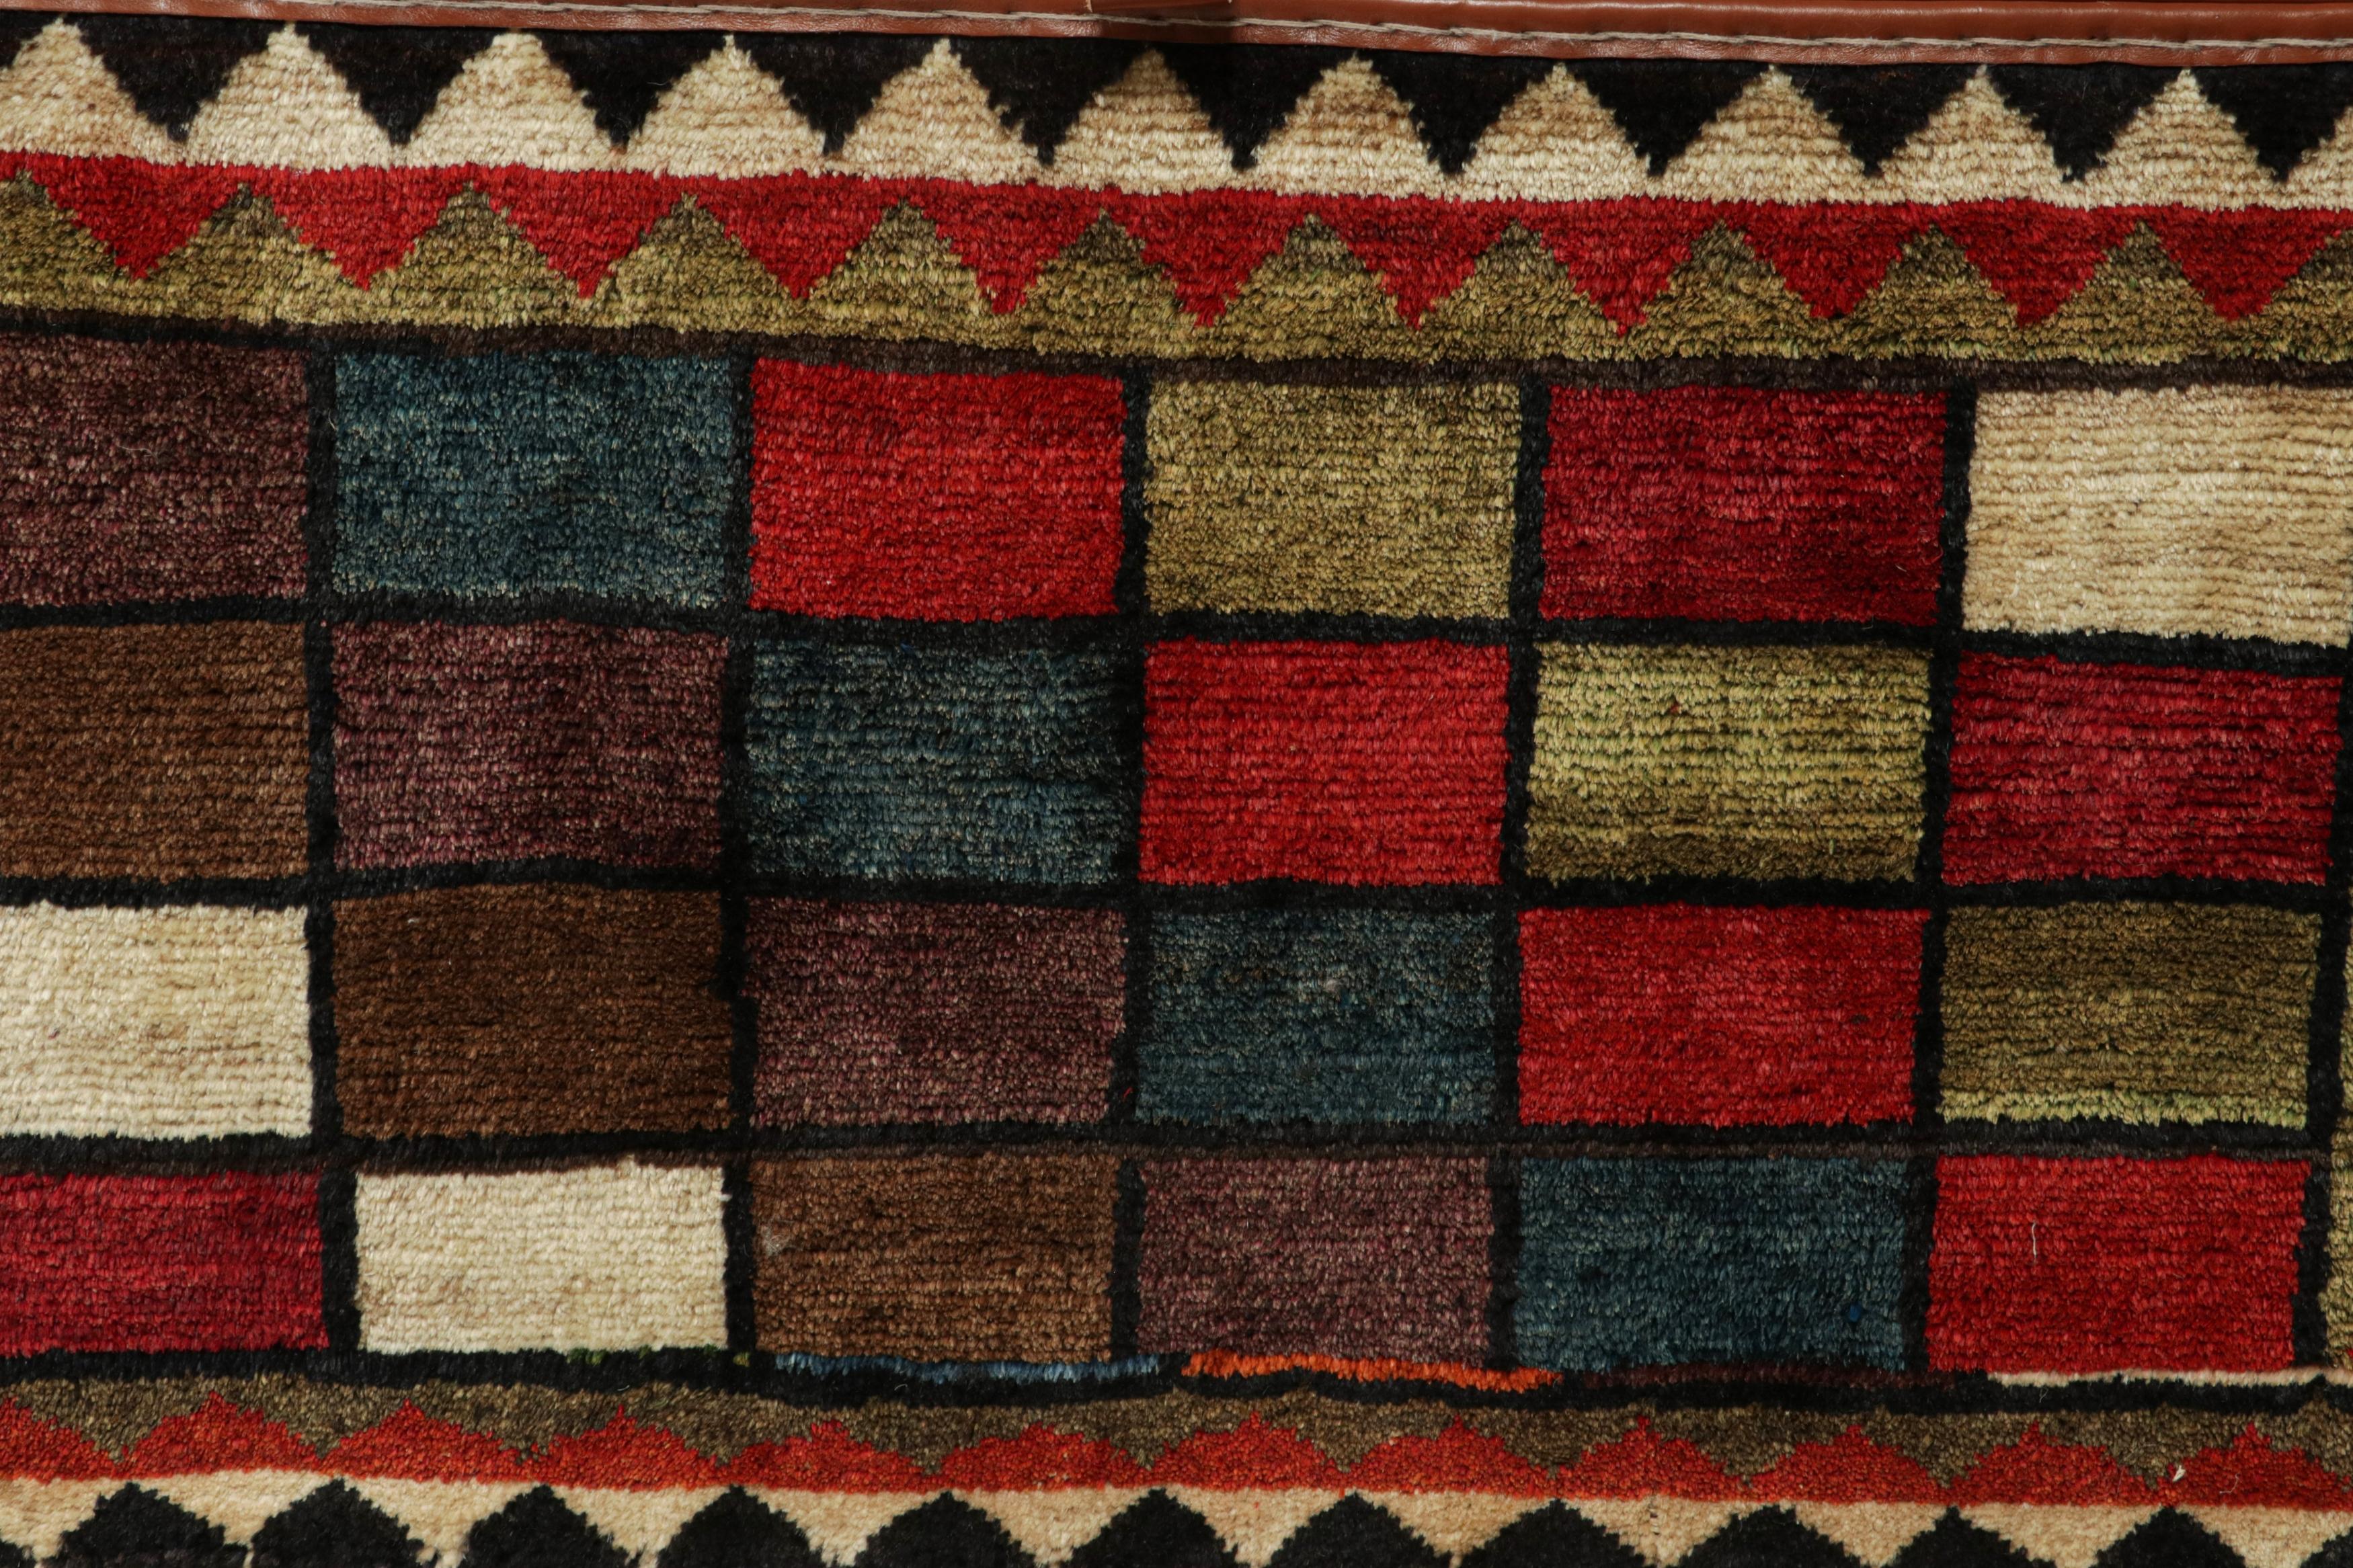 Hand-Knotted Rug & Kilim’s Persian Tribal Storage Chest with Colorful Geometric Patterns For Sale